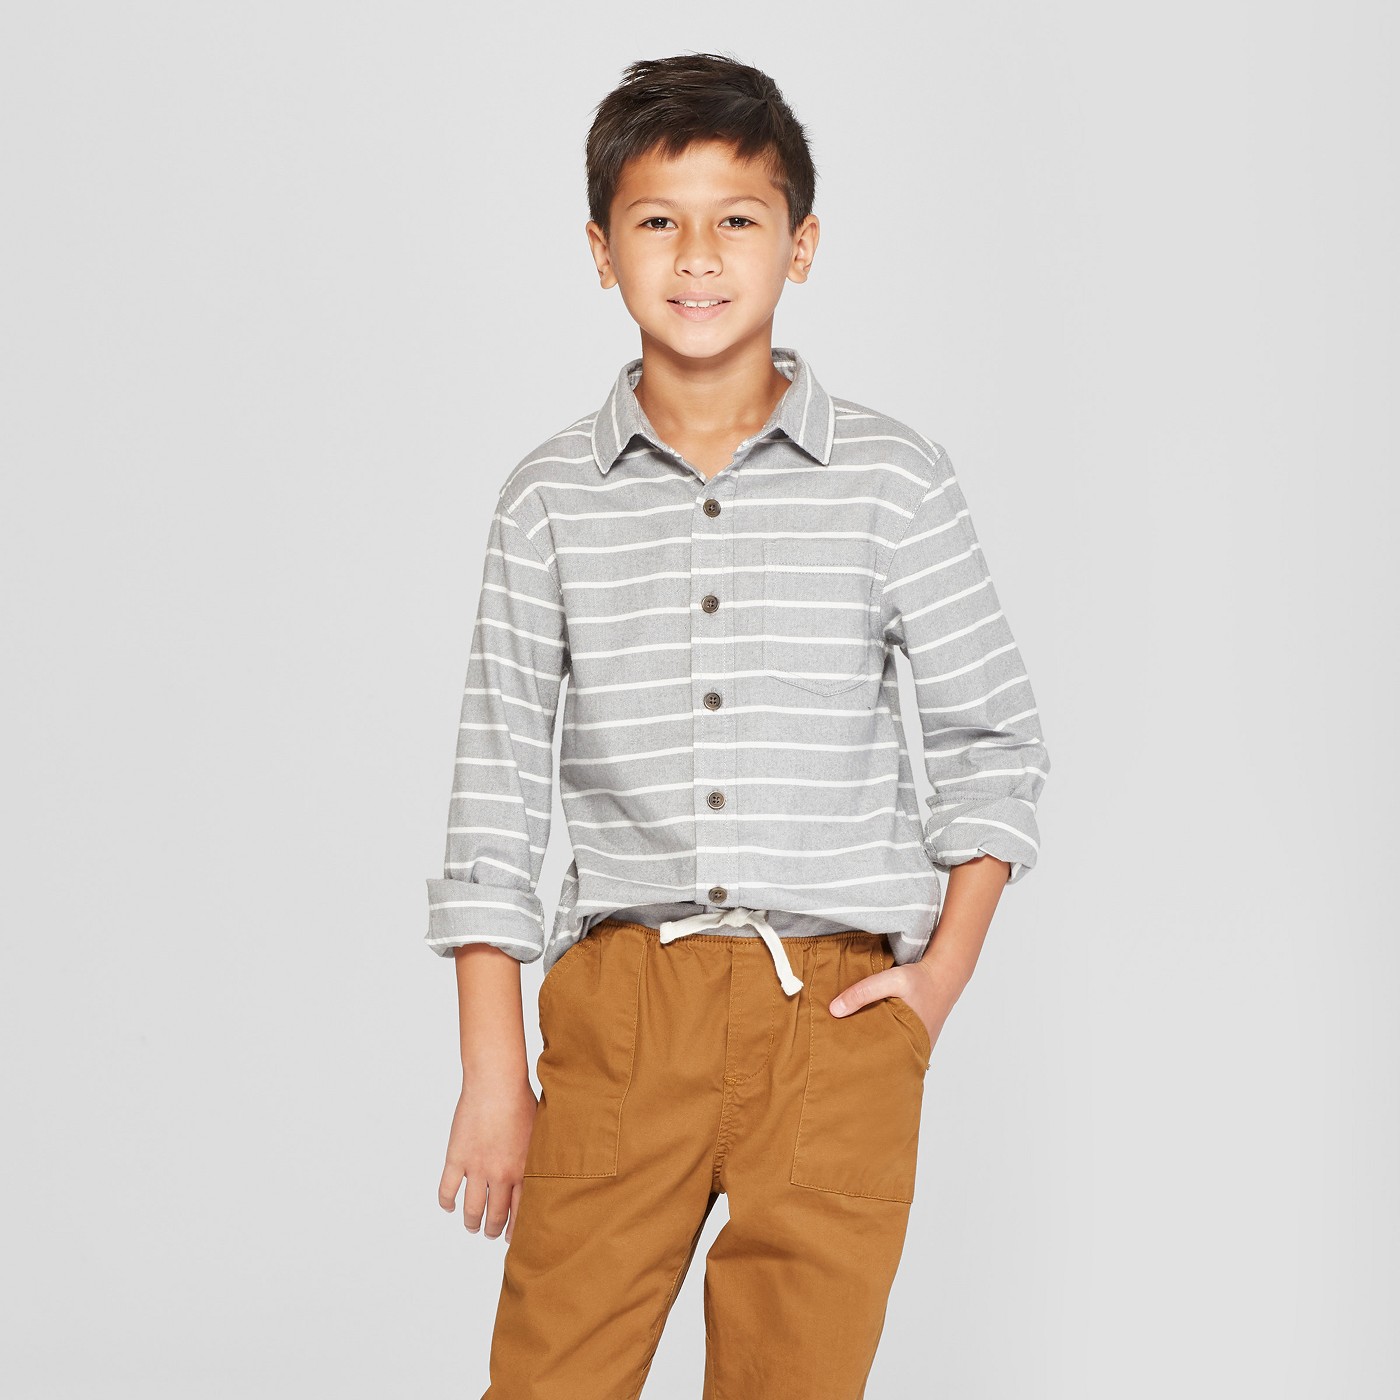 Boys' Flannel Long Sleeve Button-Down Shirt - Cat & Jackâ„¢ Gray - image 1 of 3